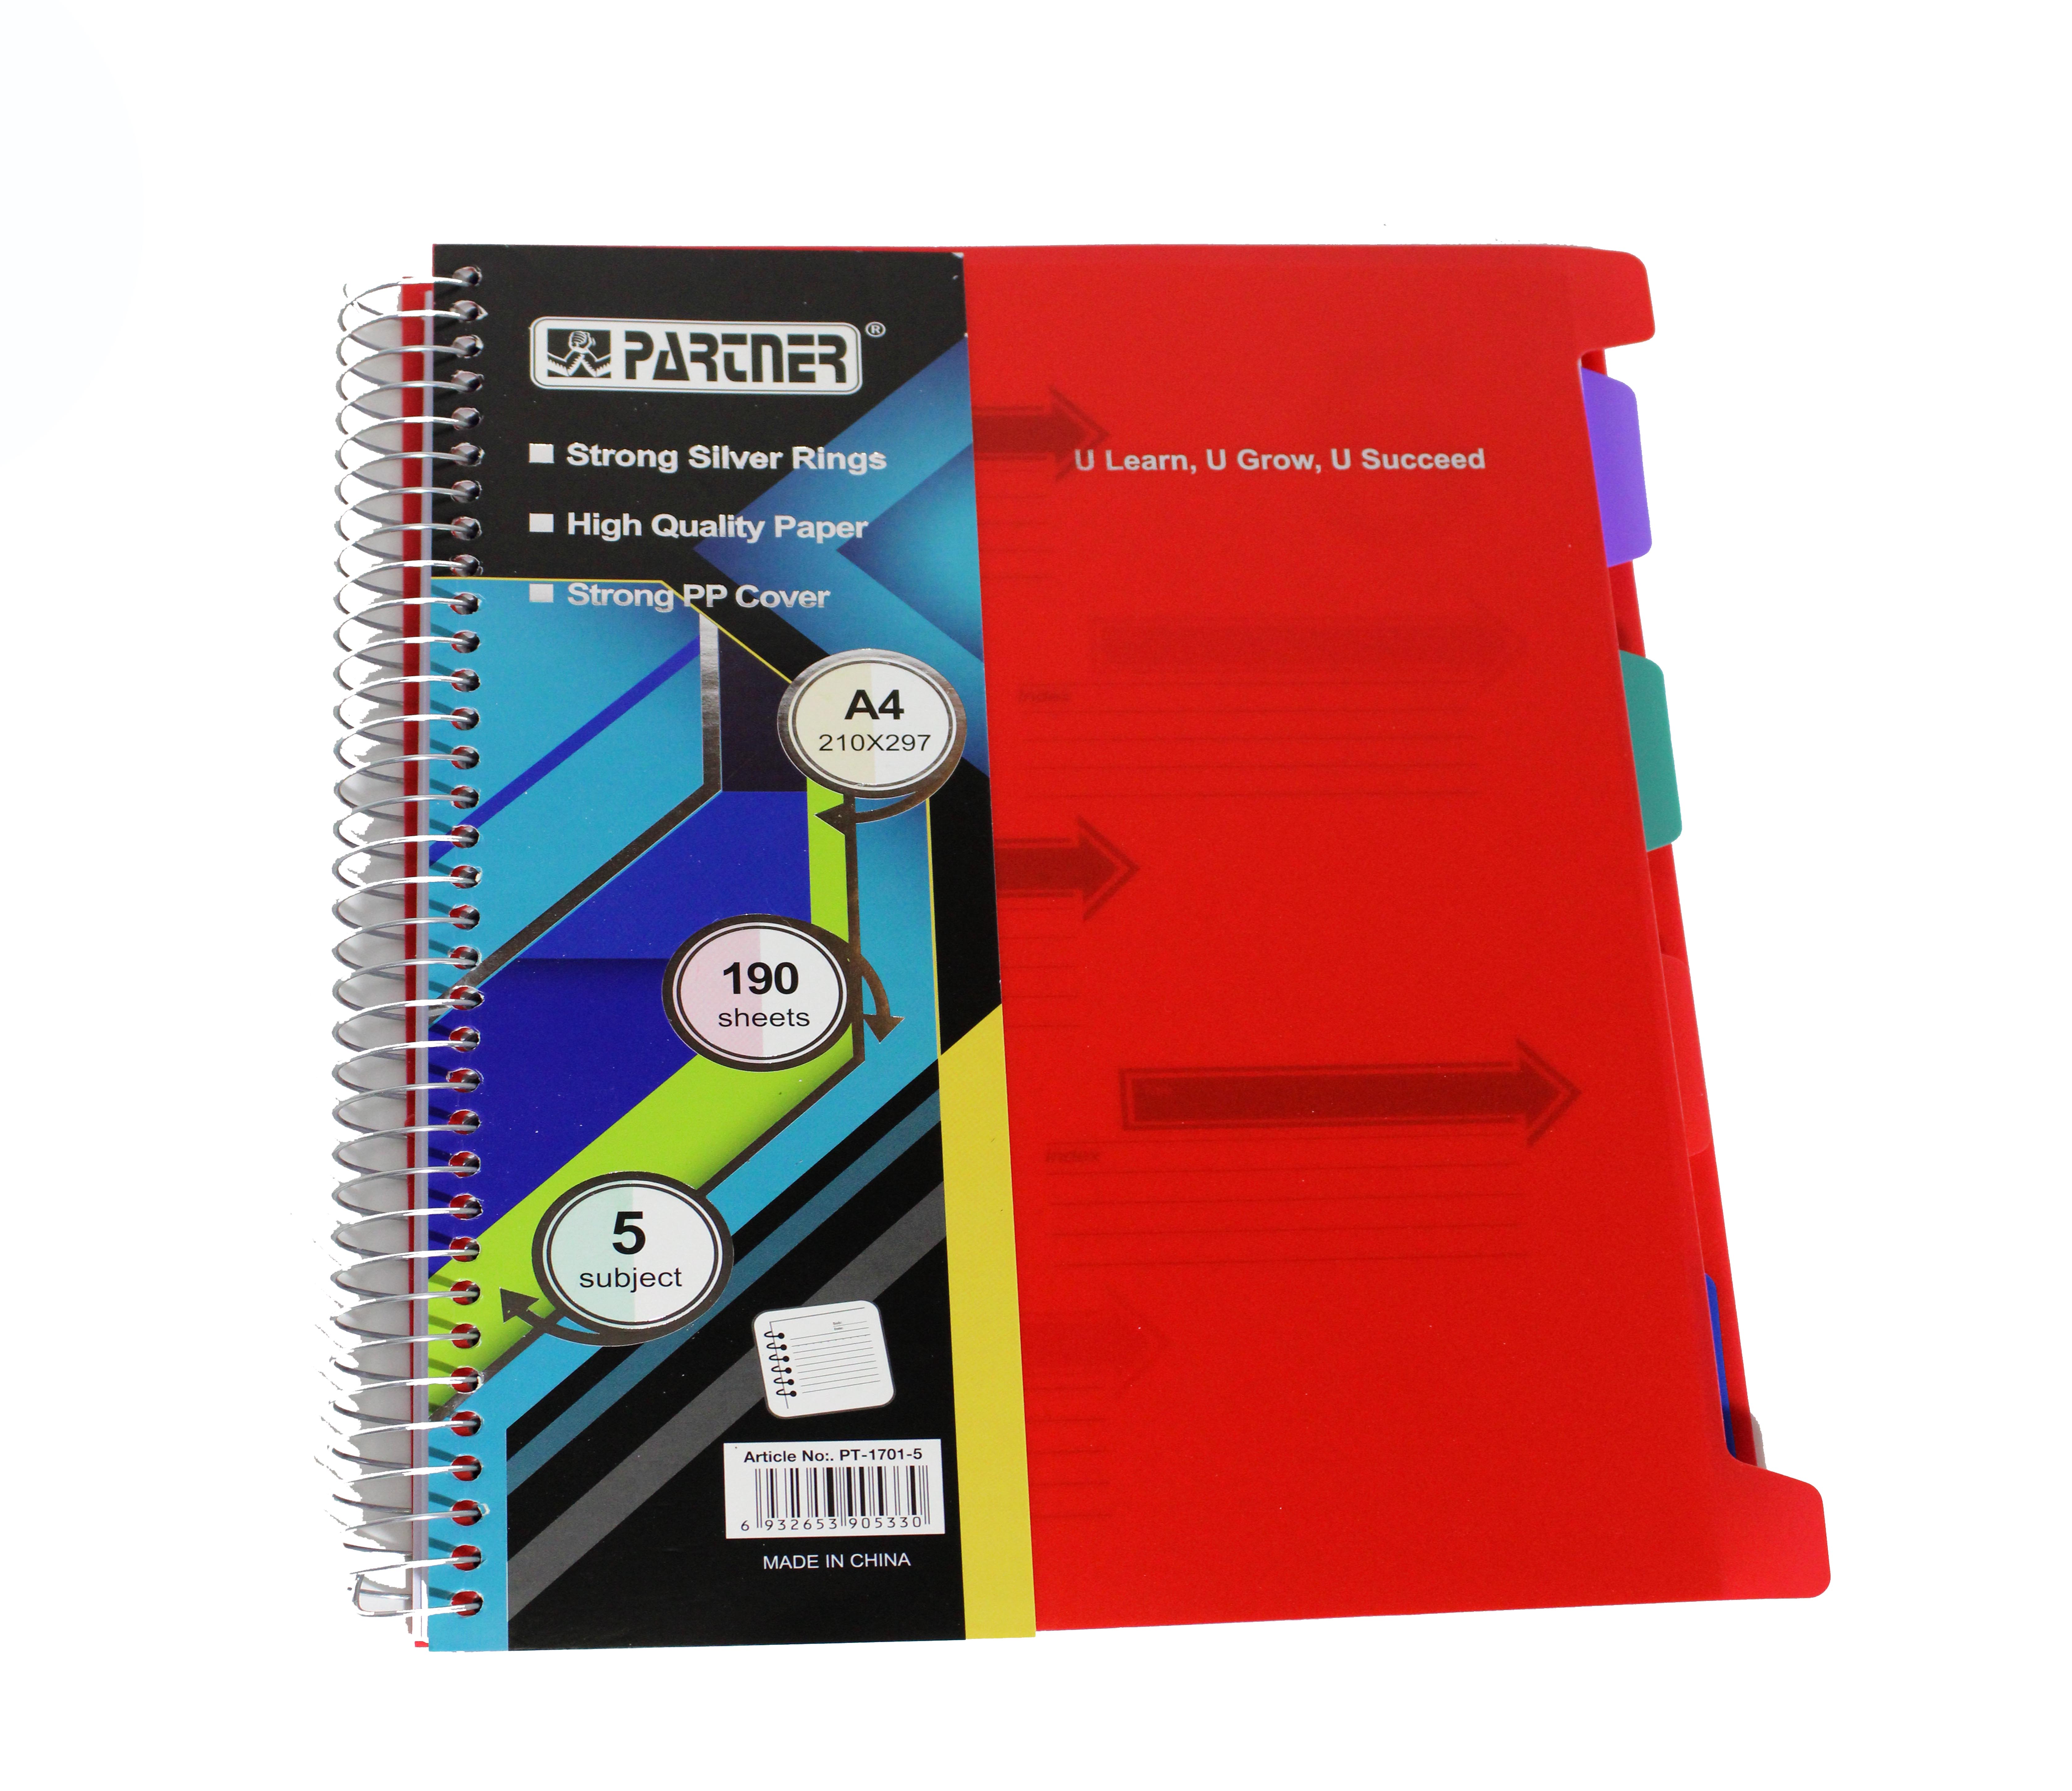 PARTNER 5 SUBJECT A4 SIZE 210*297 190 SHEETS STRONG SILVER RINGS, HIGH QUALITY PAPER,STRONG PP COVER